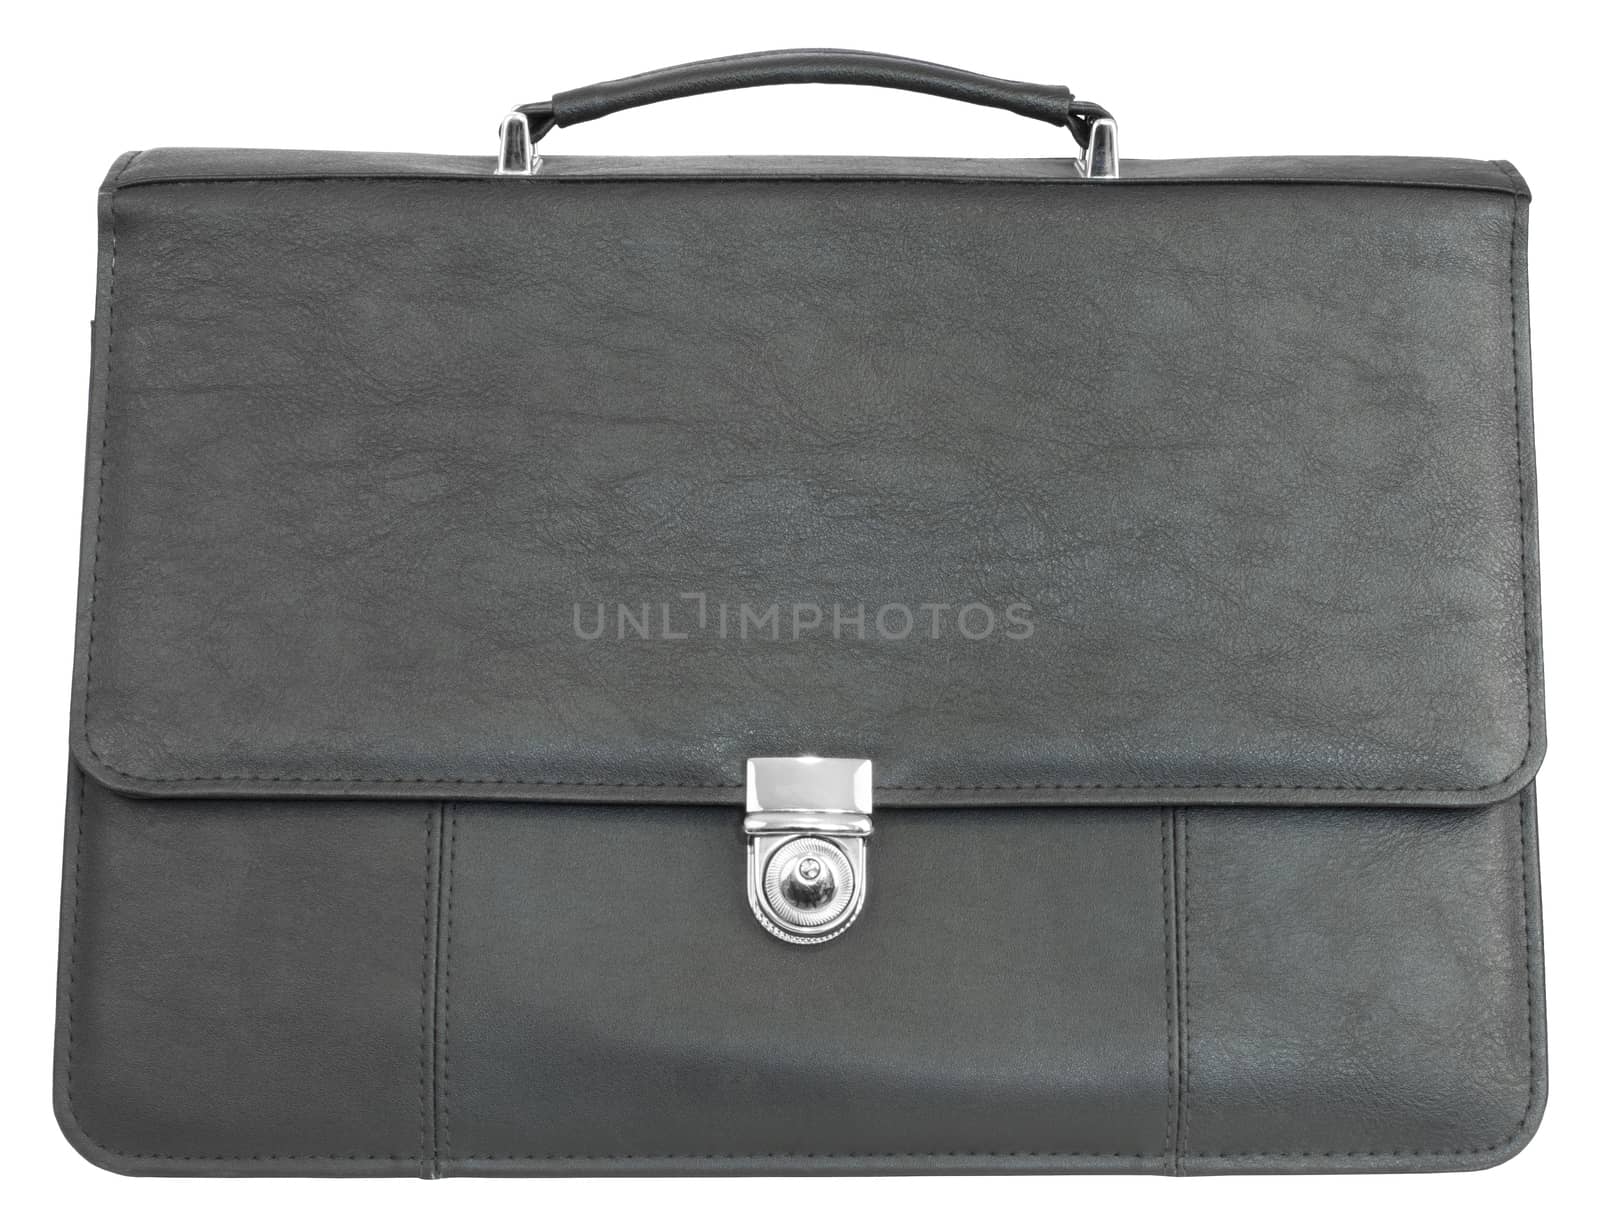 Black leather briefcase. Isolated on white background